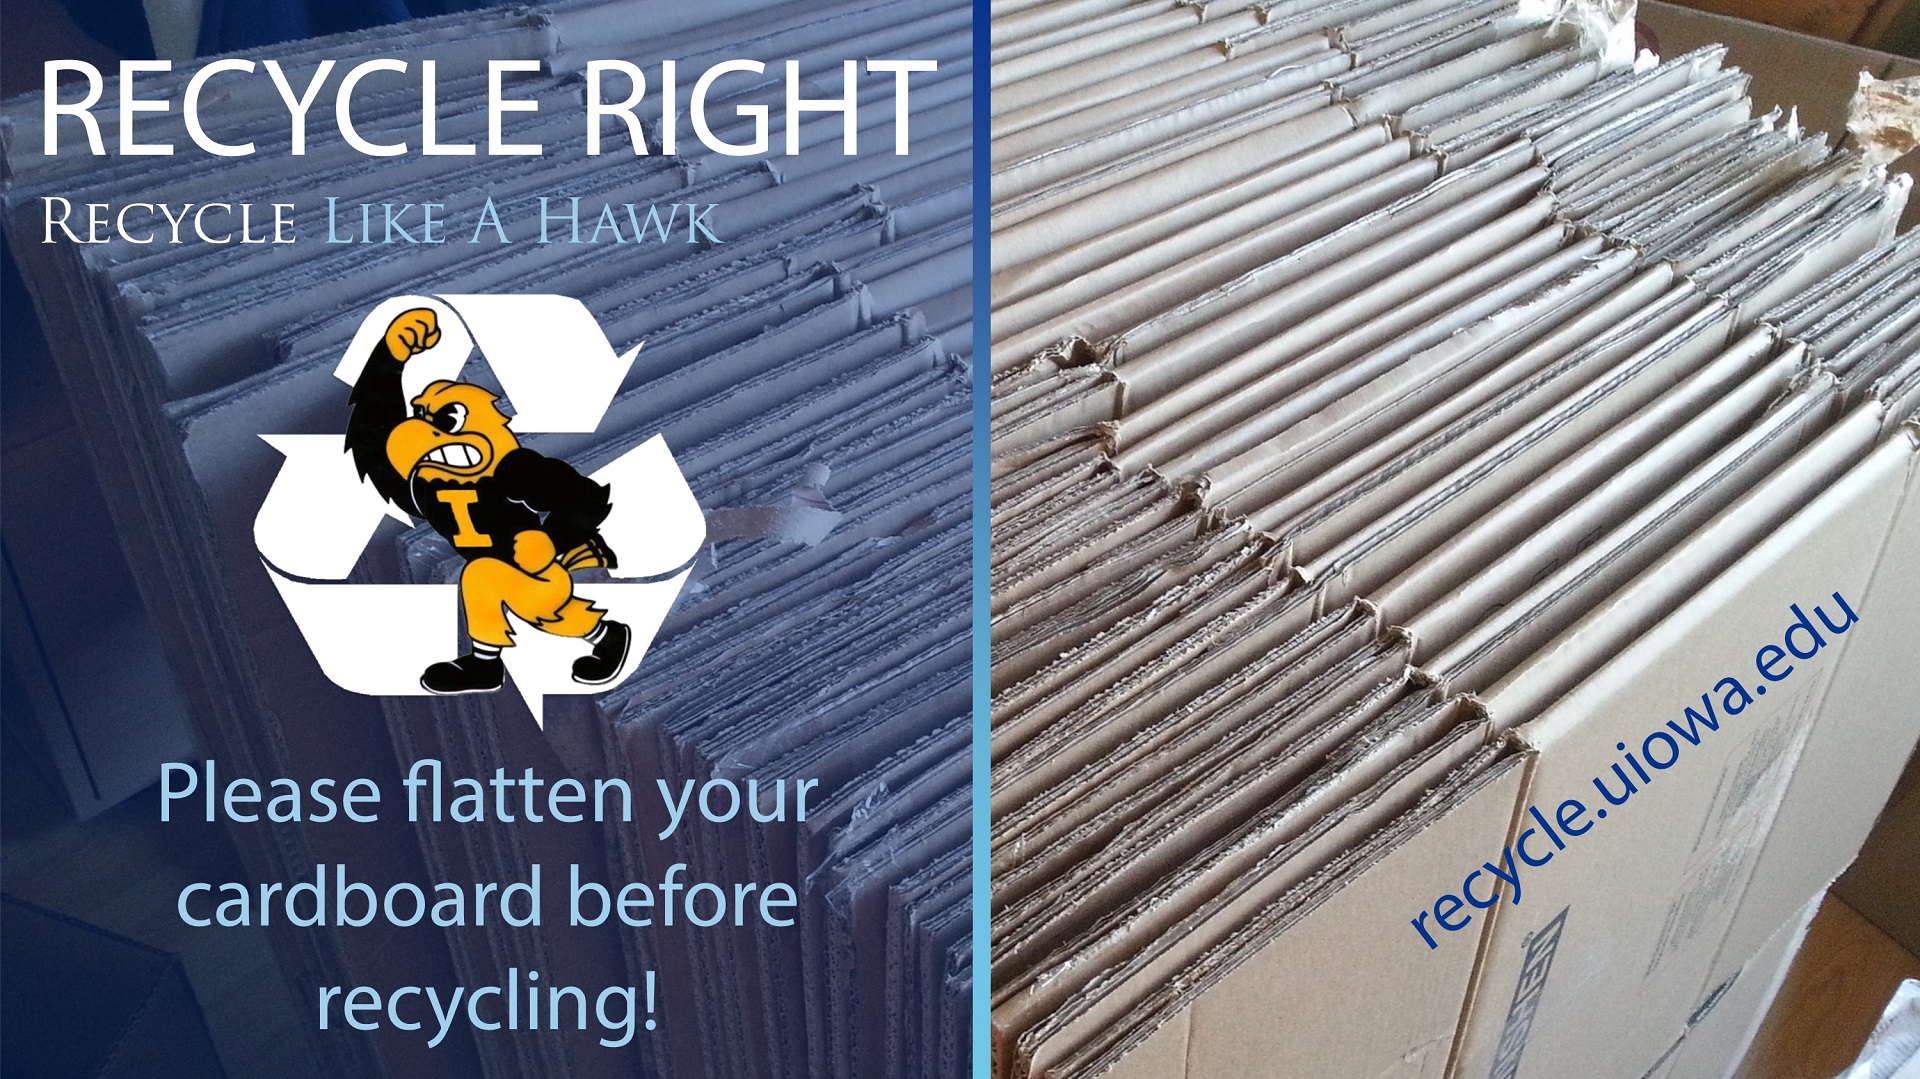 Recycle right. Recycle like a Hawk. Please flatten your cardboard before recycling. recycle.uiowa.edu